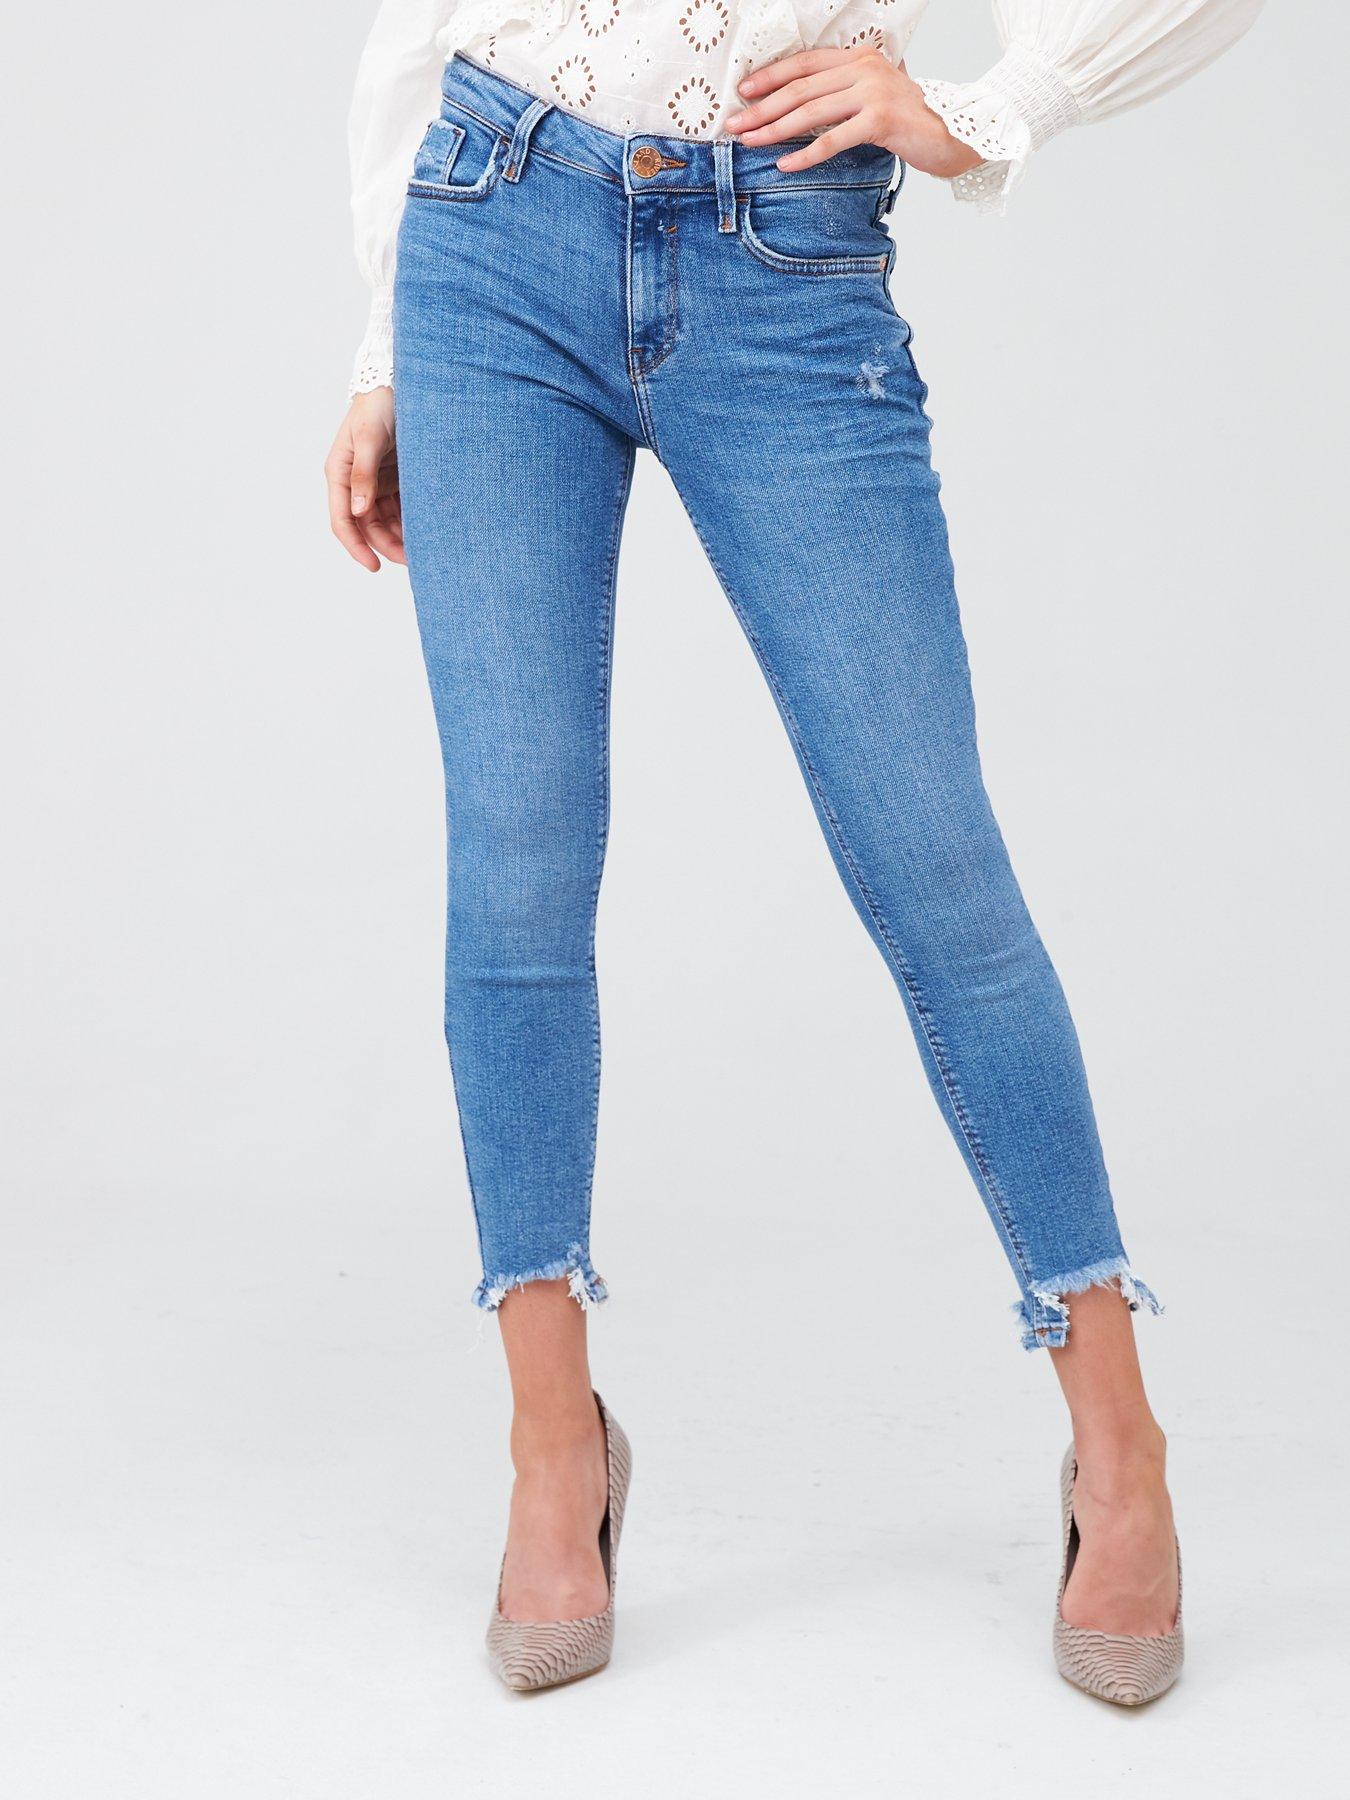 river island amelie jeans